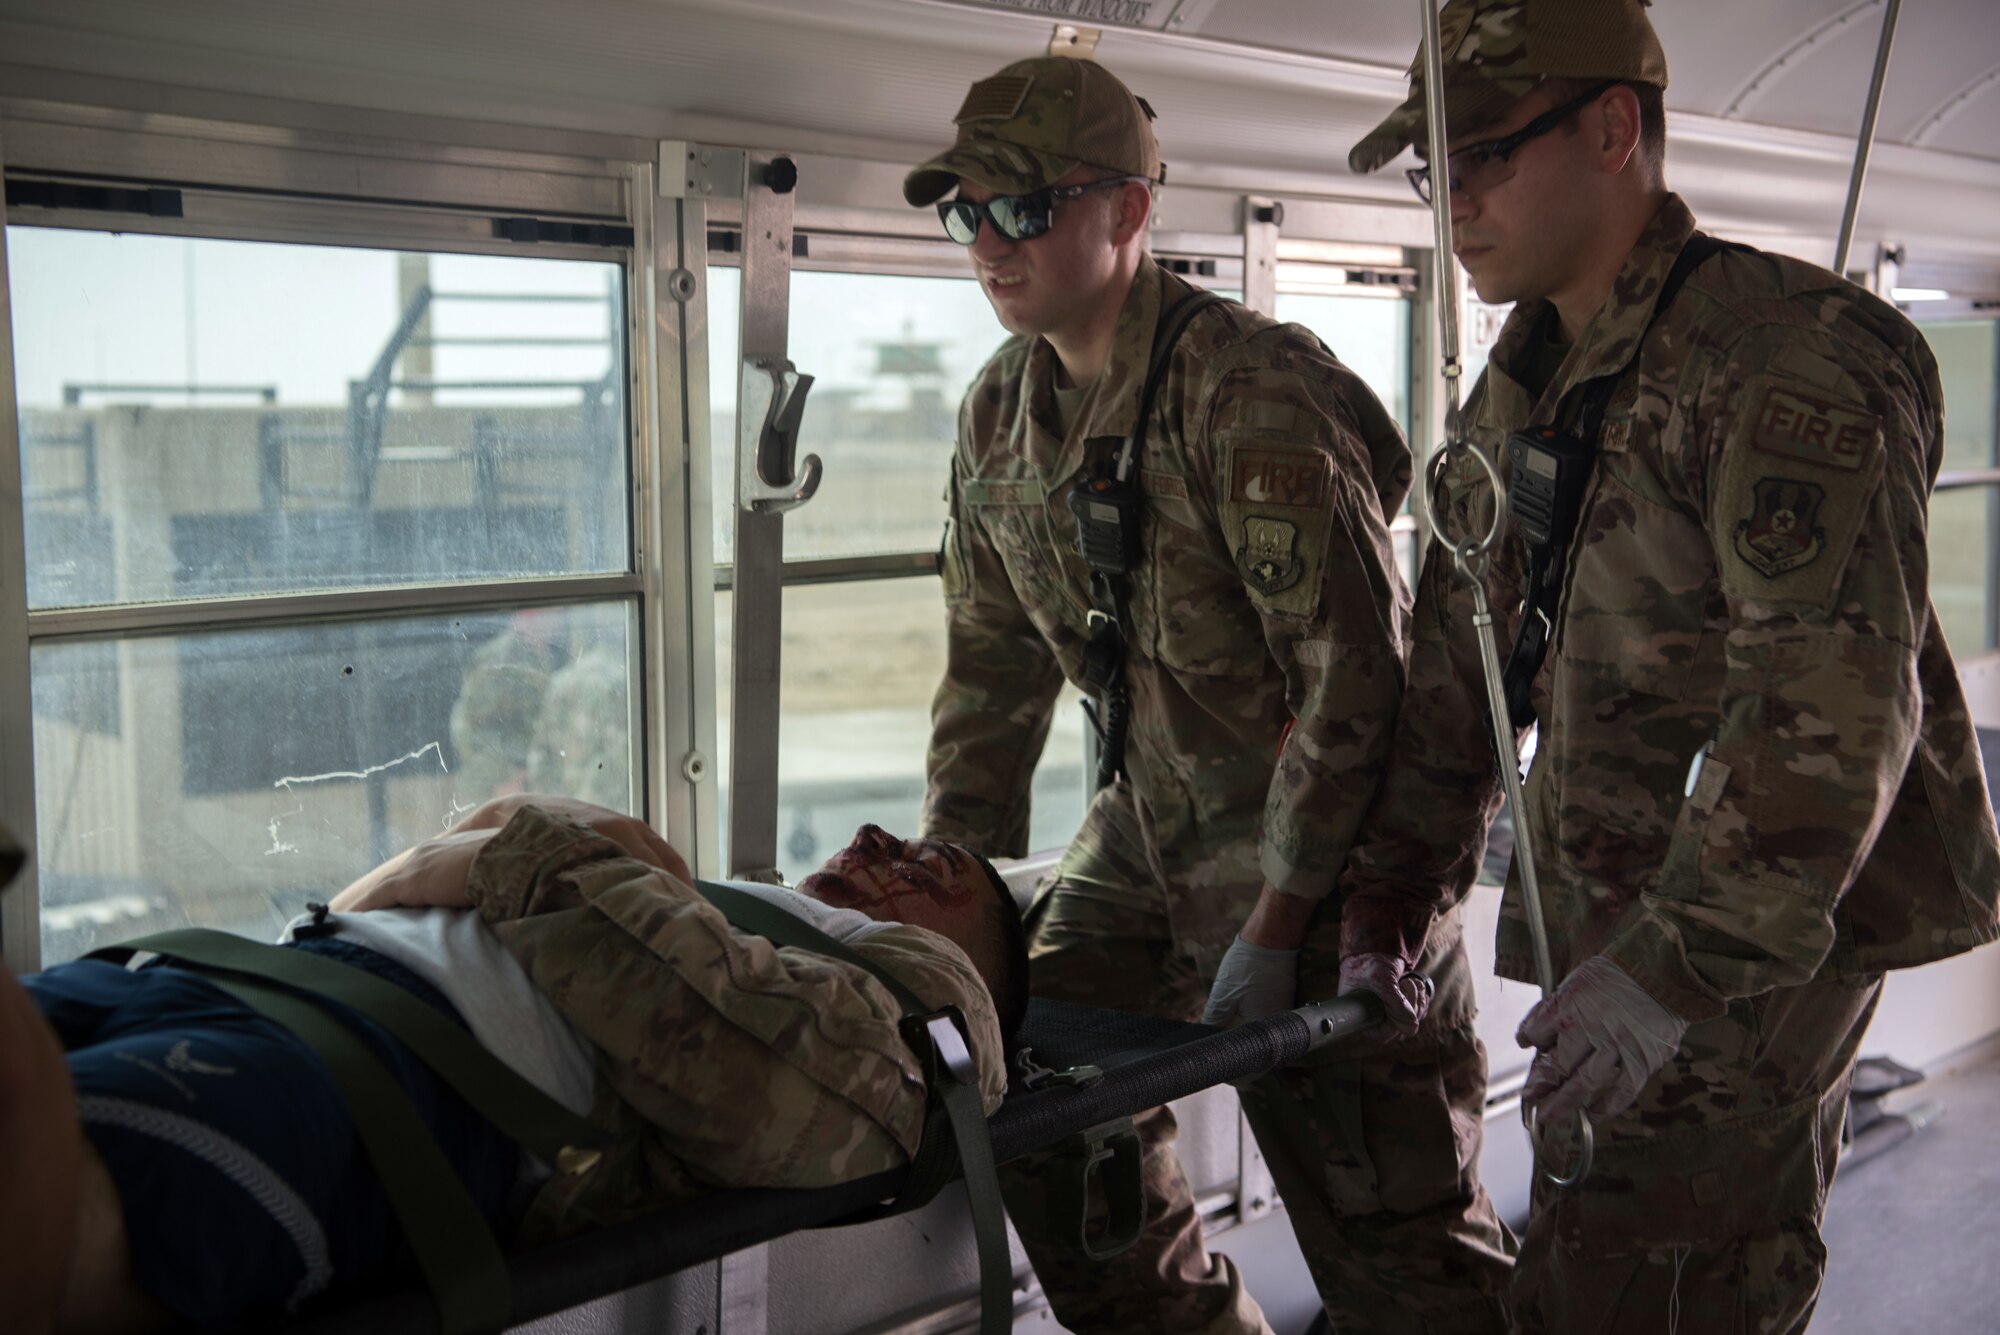 Firefighters assigned to the 380th Expeditionary Civil Engineer Squadron load a simulated casualty onto a medical transportation bus during a first responder exercise Sept. 24, 2019, on Al Dhafra Air Base, United Arab Emirates. The exercise showcased the readiness, knowledge of emergency procedures and interagency cooperation amongst the wing’s first responders. (U.S. Air Force photo by Tech. Sgt. Jocelyn A. Ford)